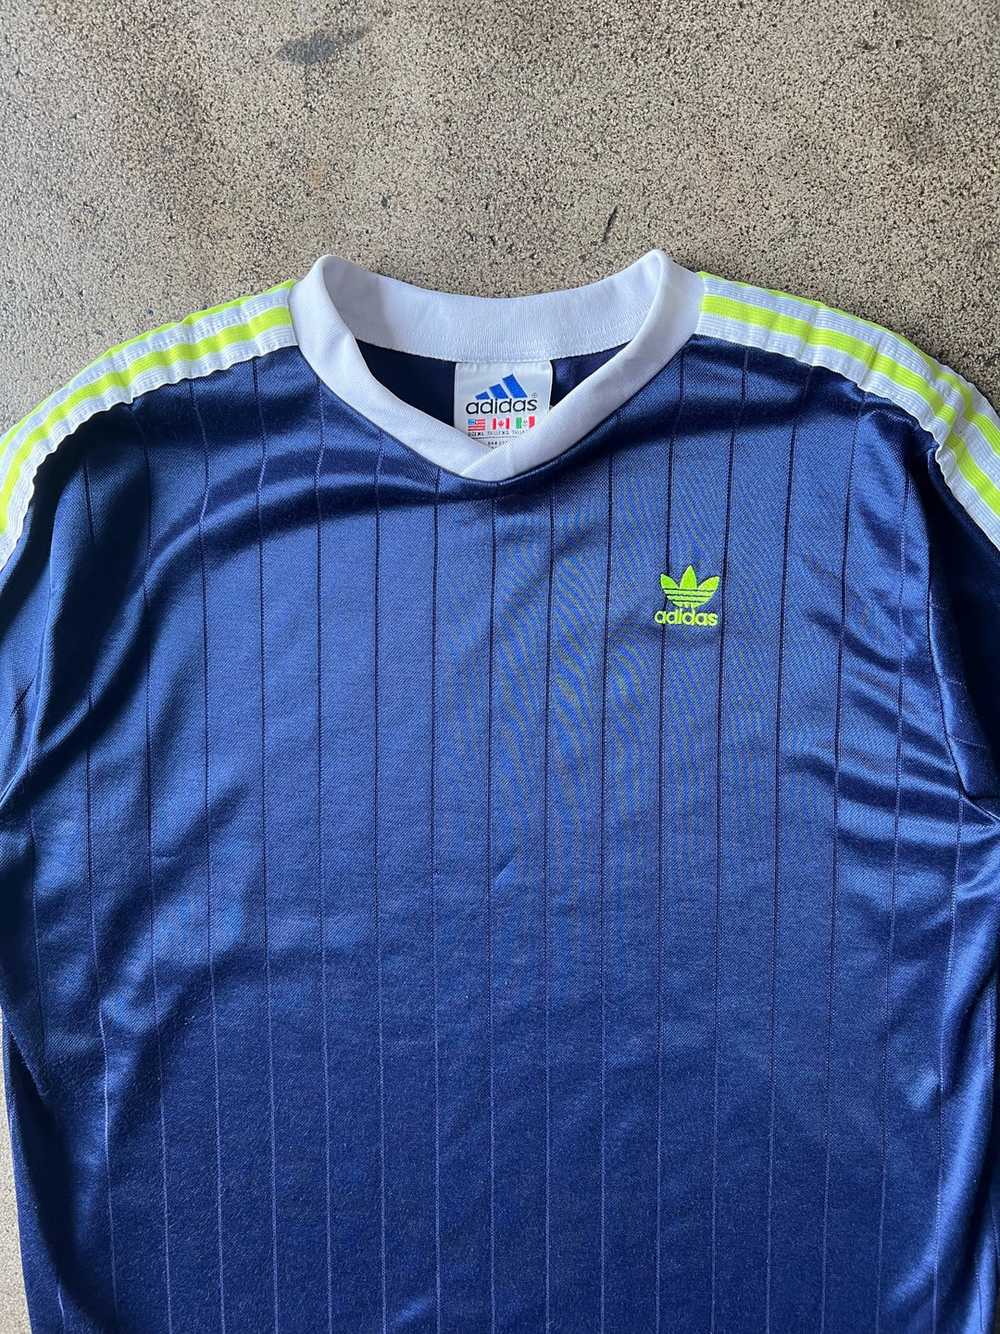 1990s Adidas Soccer Jersey - image 2